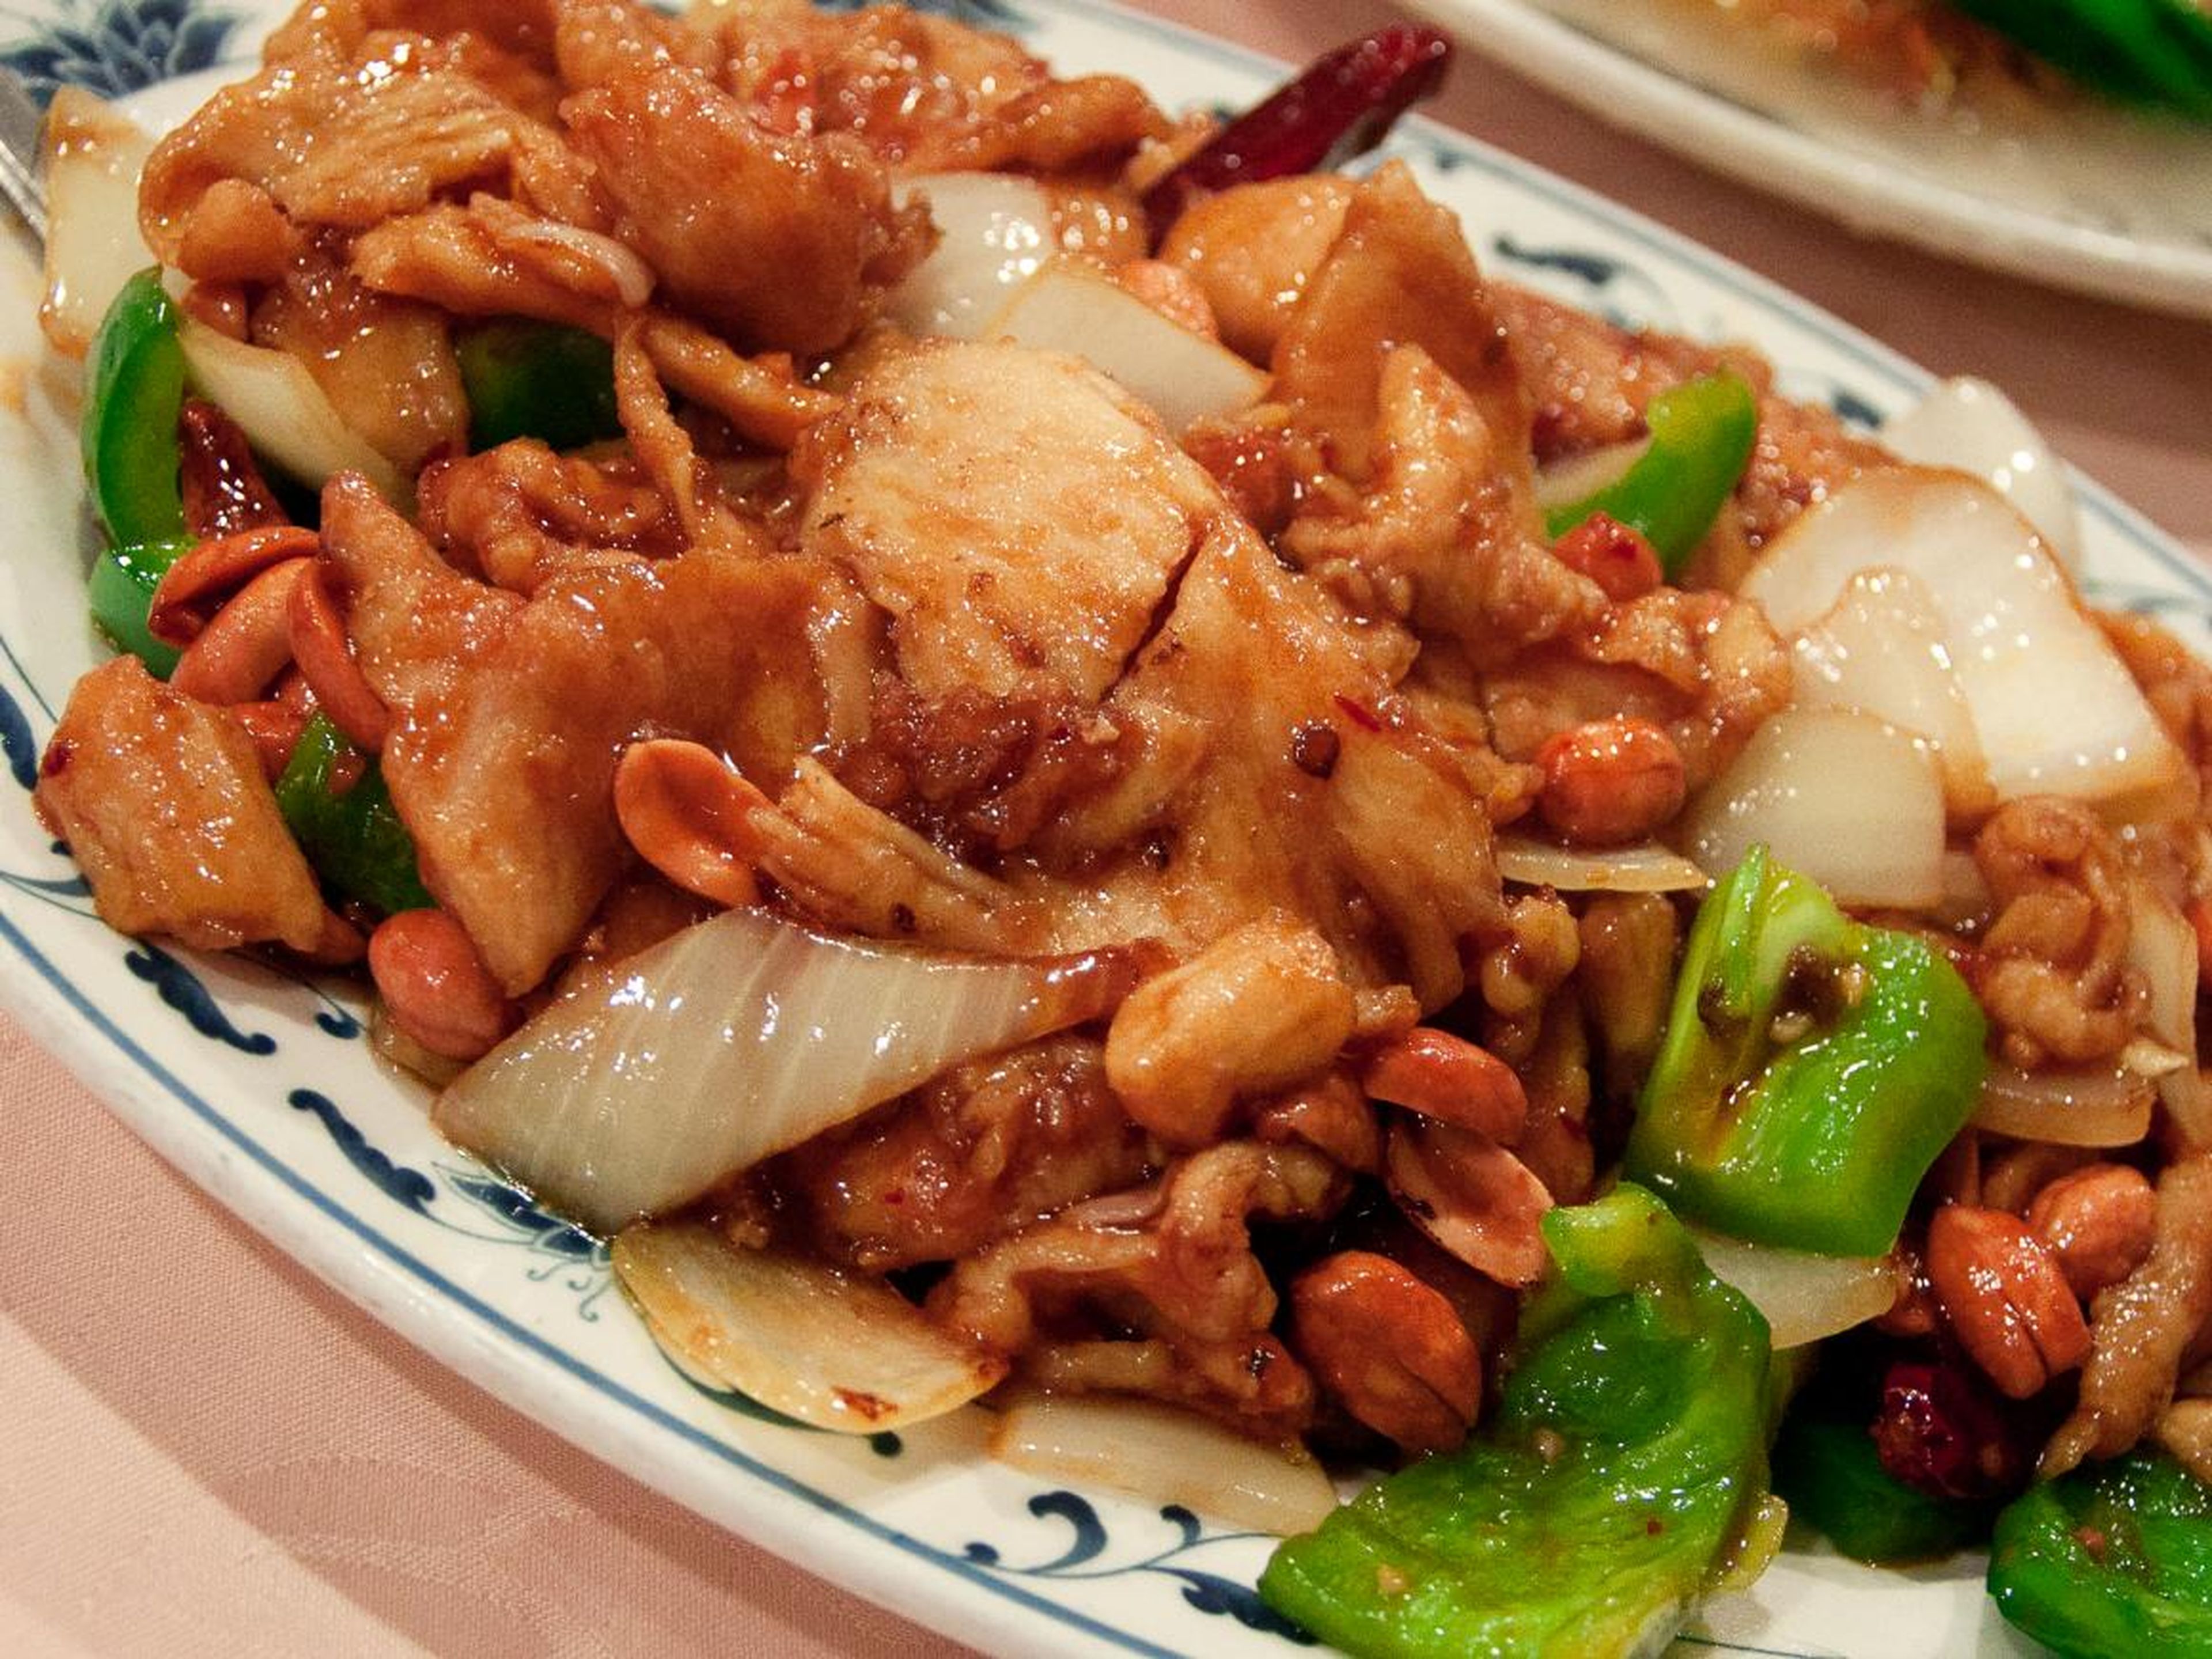 Seven-year New York City dweller, Elspeth Velten, says the array of Chinese food across the five boroughs is not to be missed.